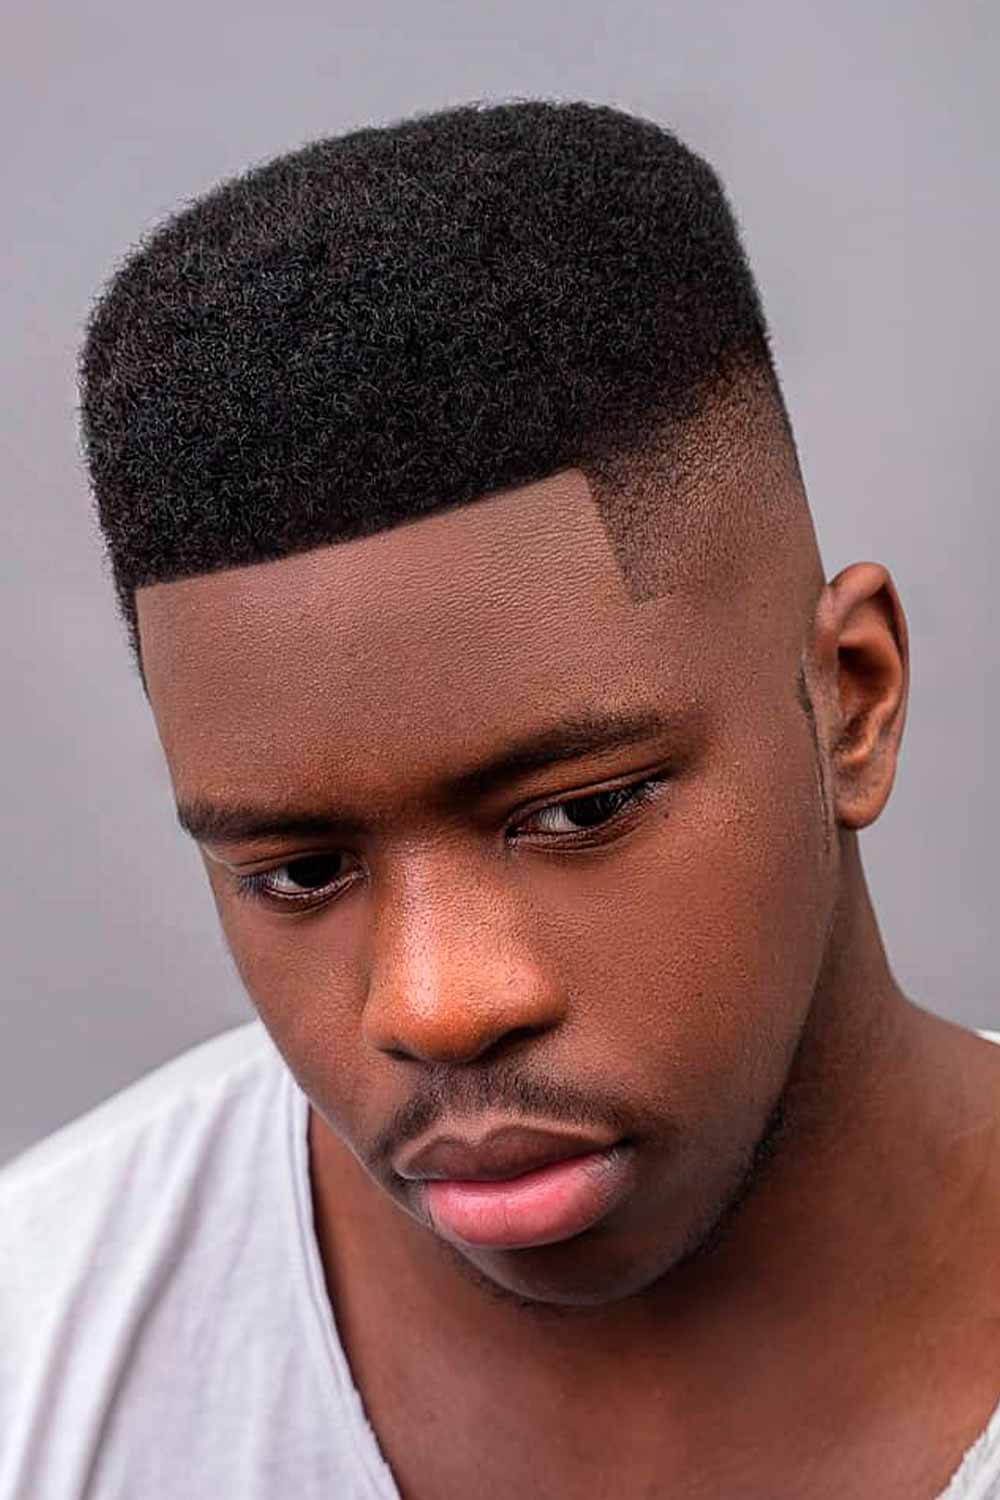 5 New Men's Haircuts to Try in 2018 | Men's Haircuts San Diego